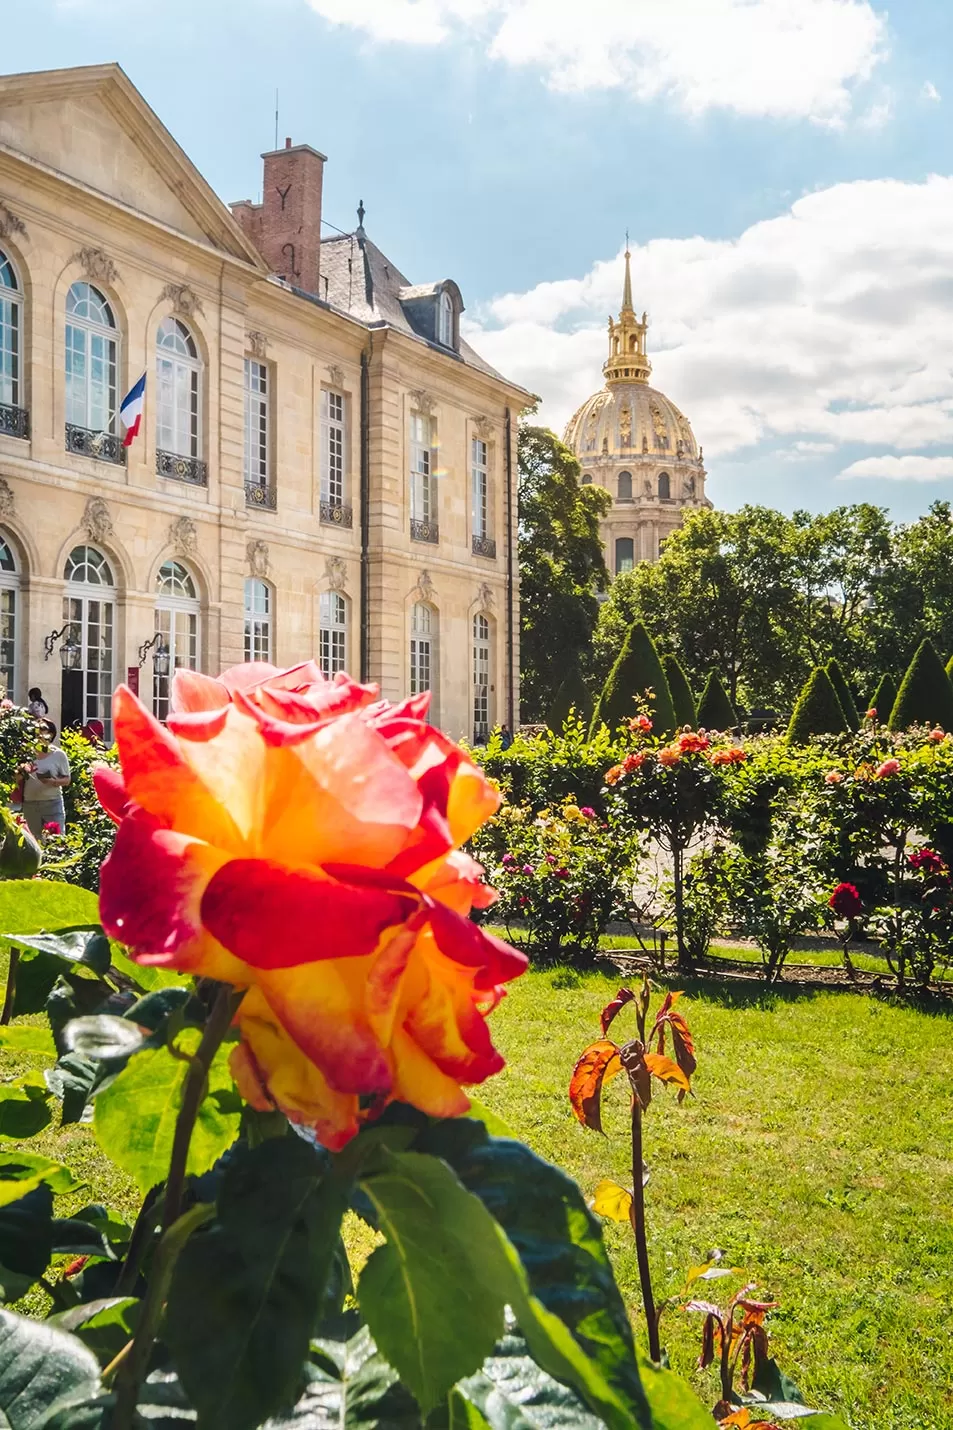 paris itinerary 4 days - what to do in paris in 4 days - rodin museum garden